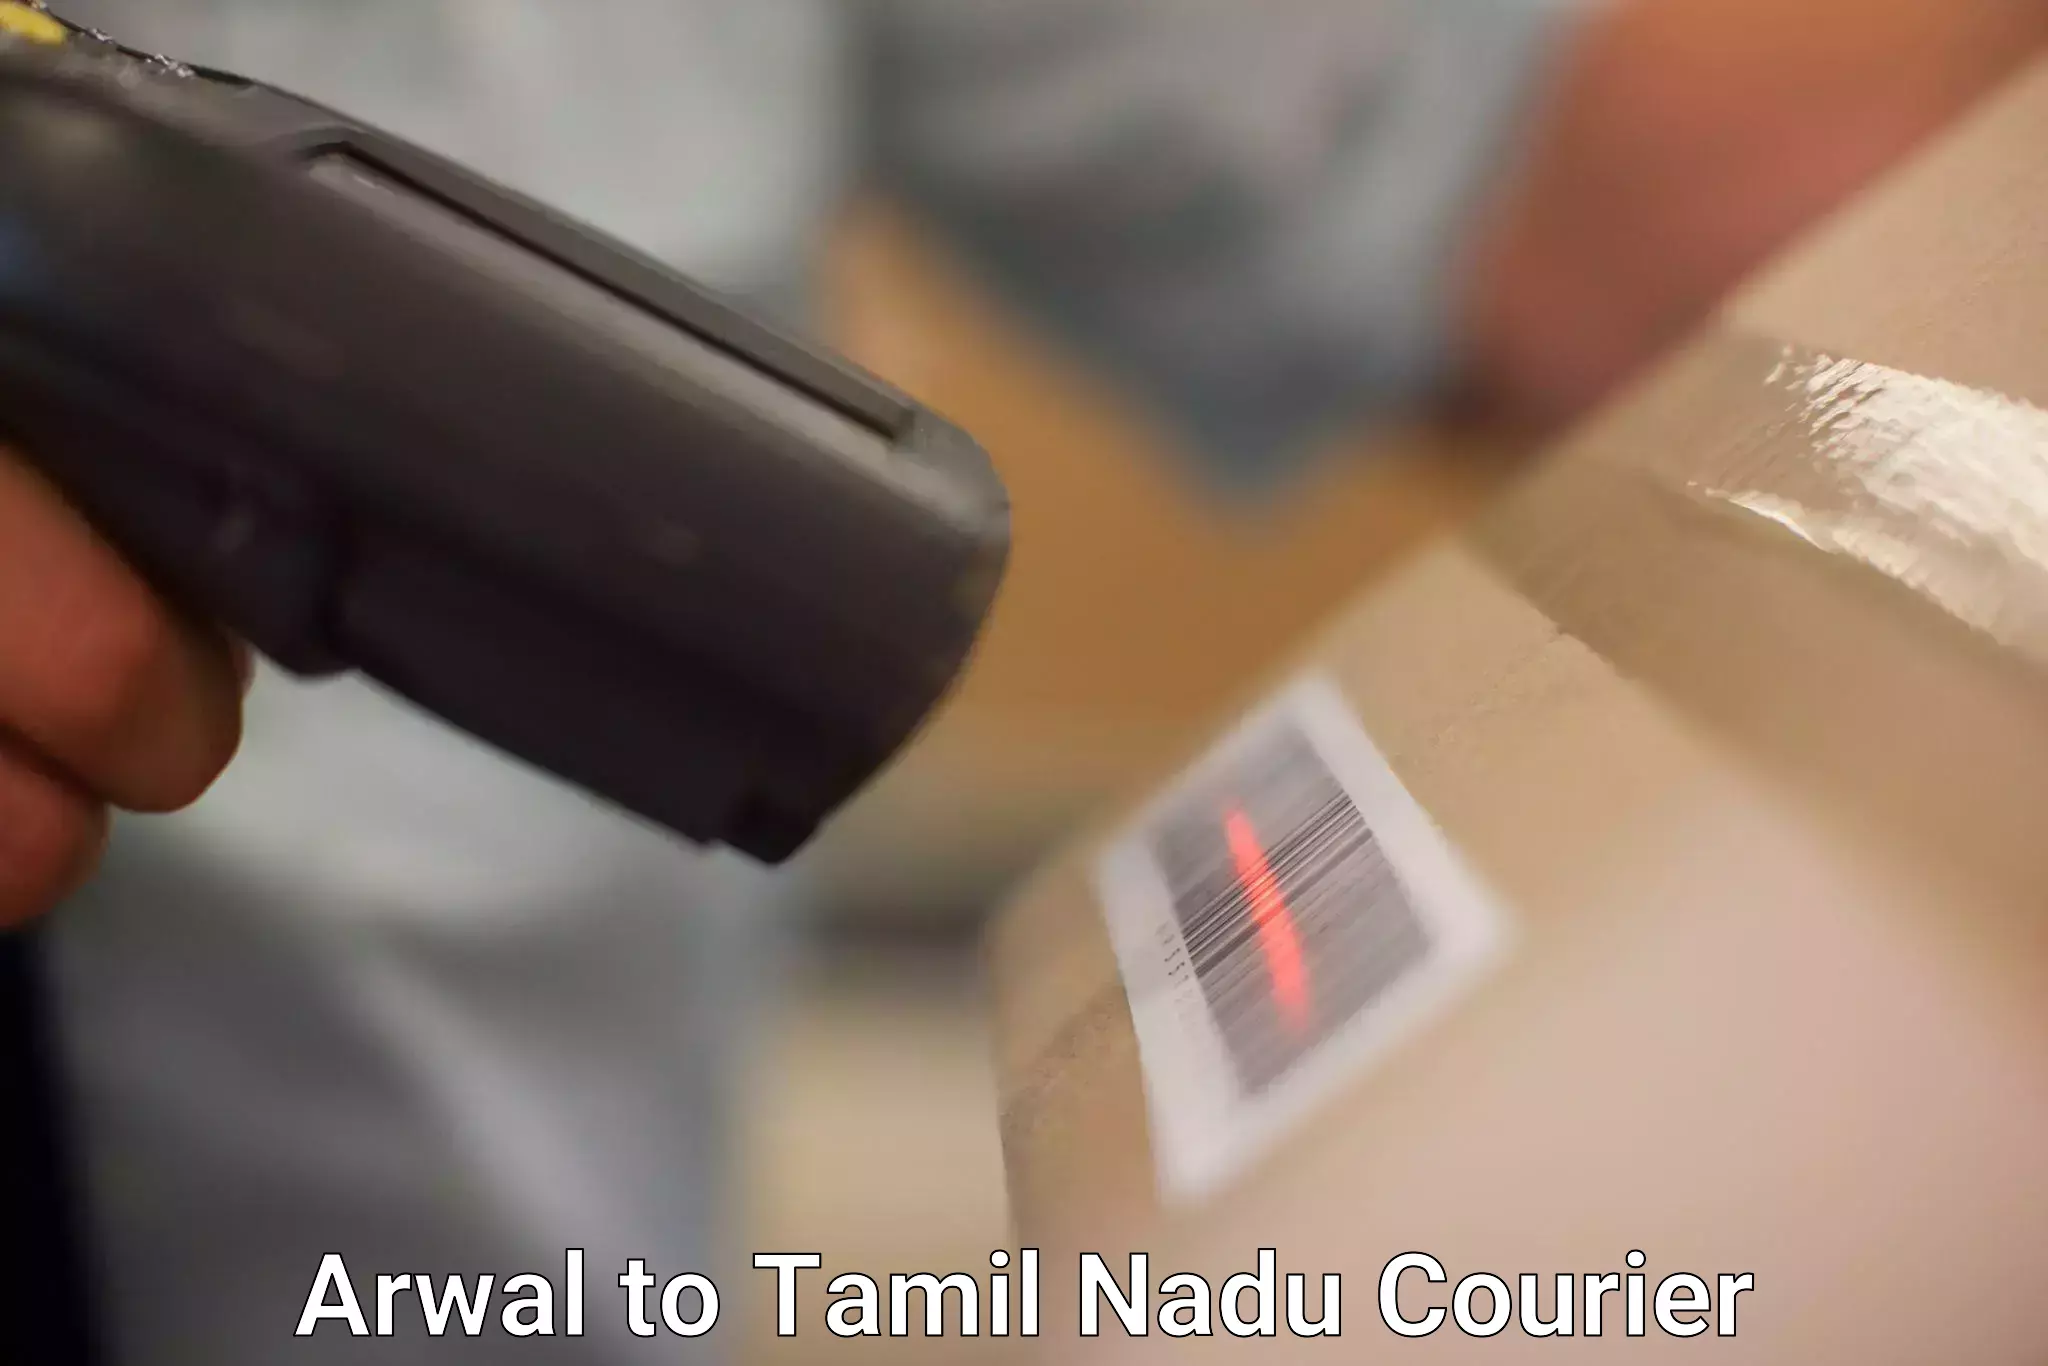 Affordable parcel service Arwal to Chennai Port